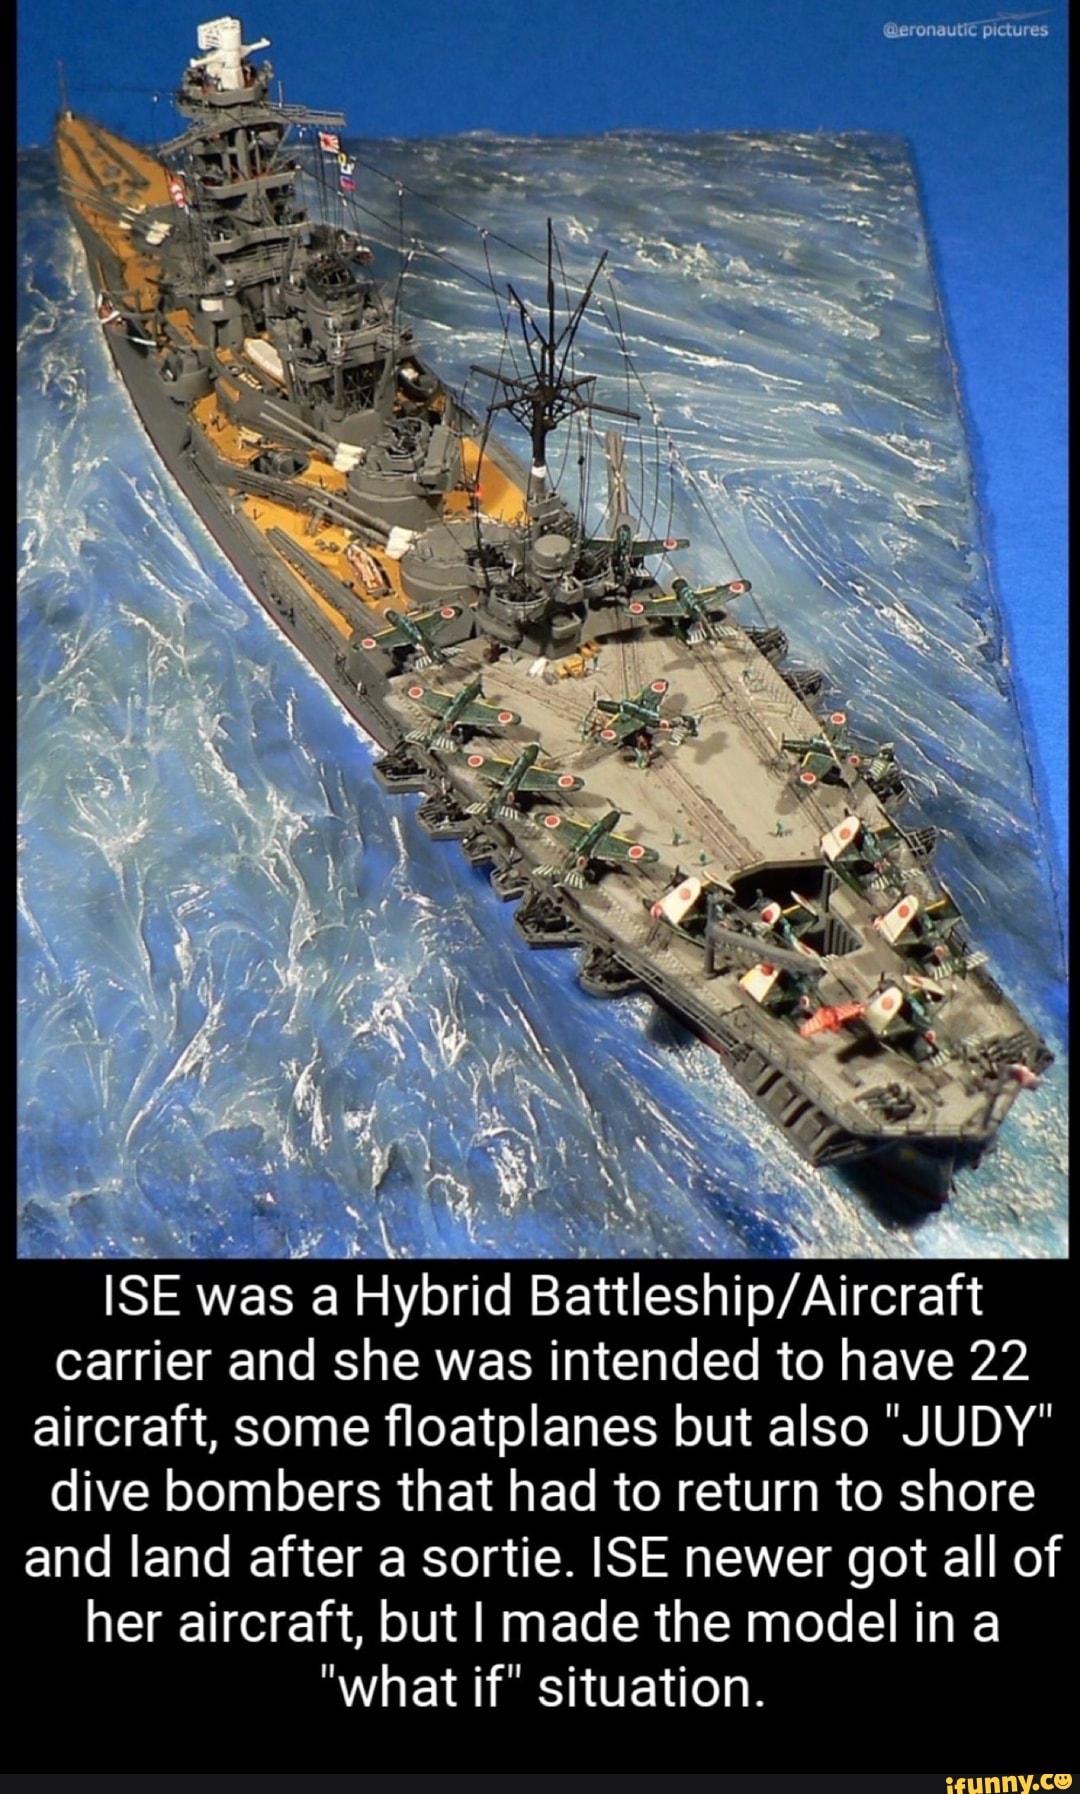 hybrid aircraft carriers